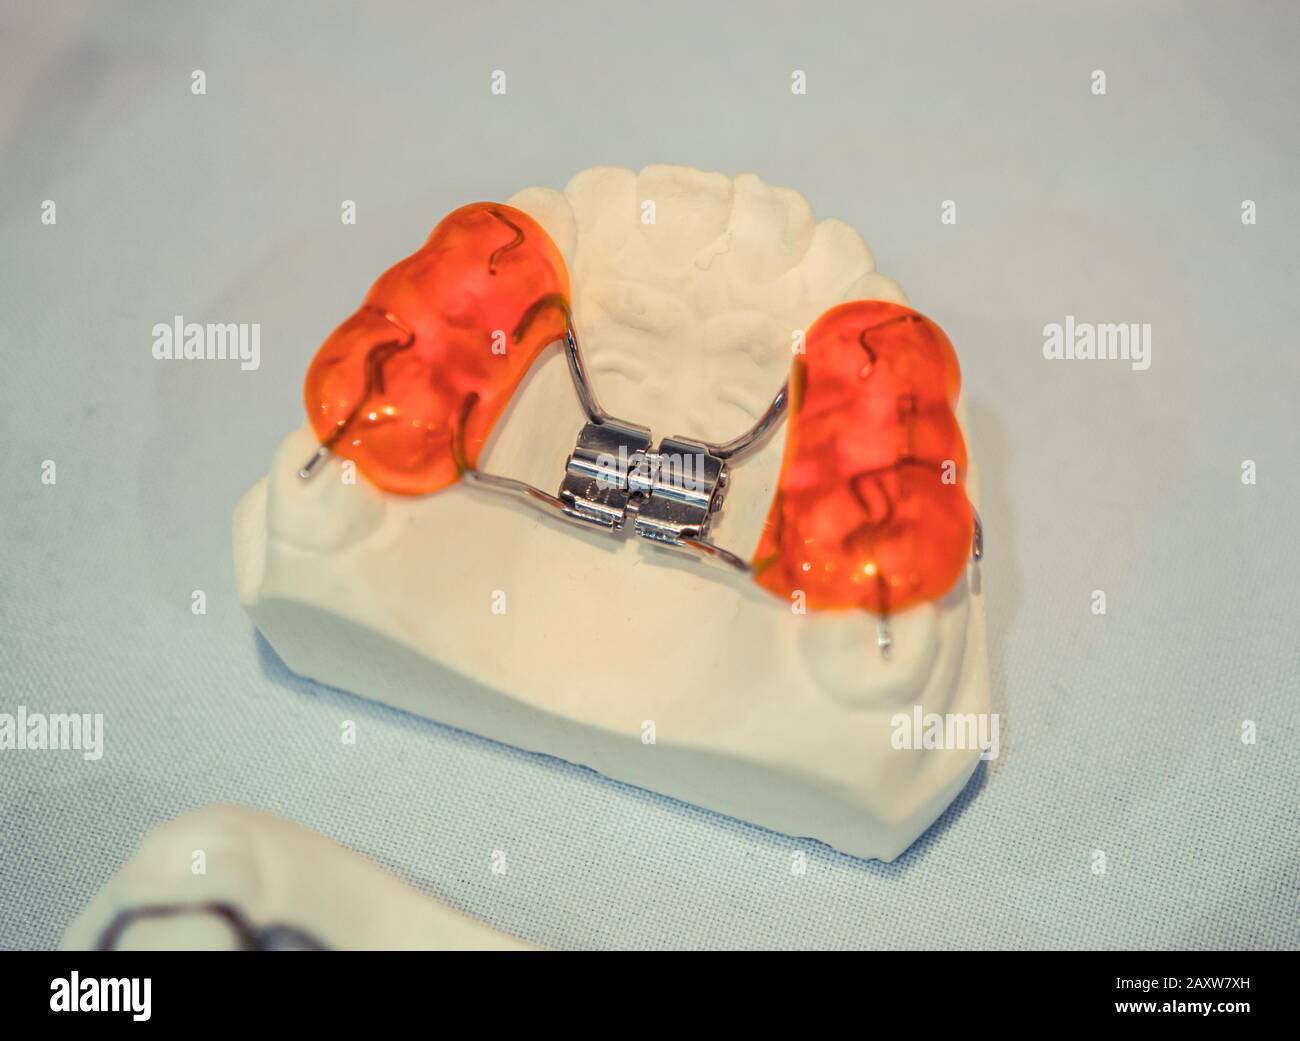 example of a bridge on an artificial human jaw close-up Stock Photo